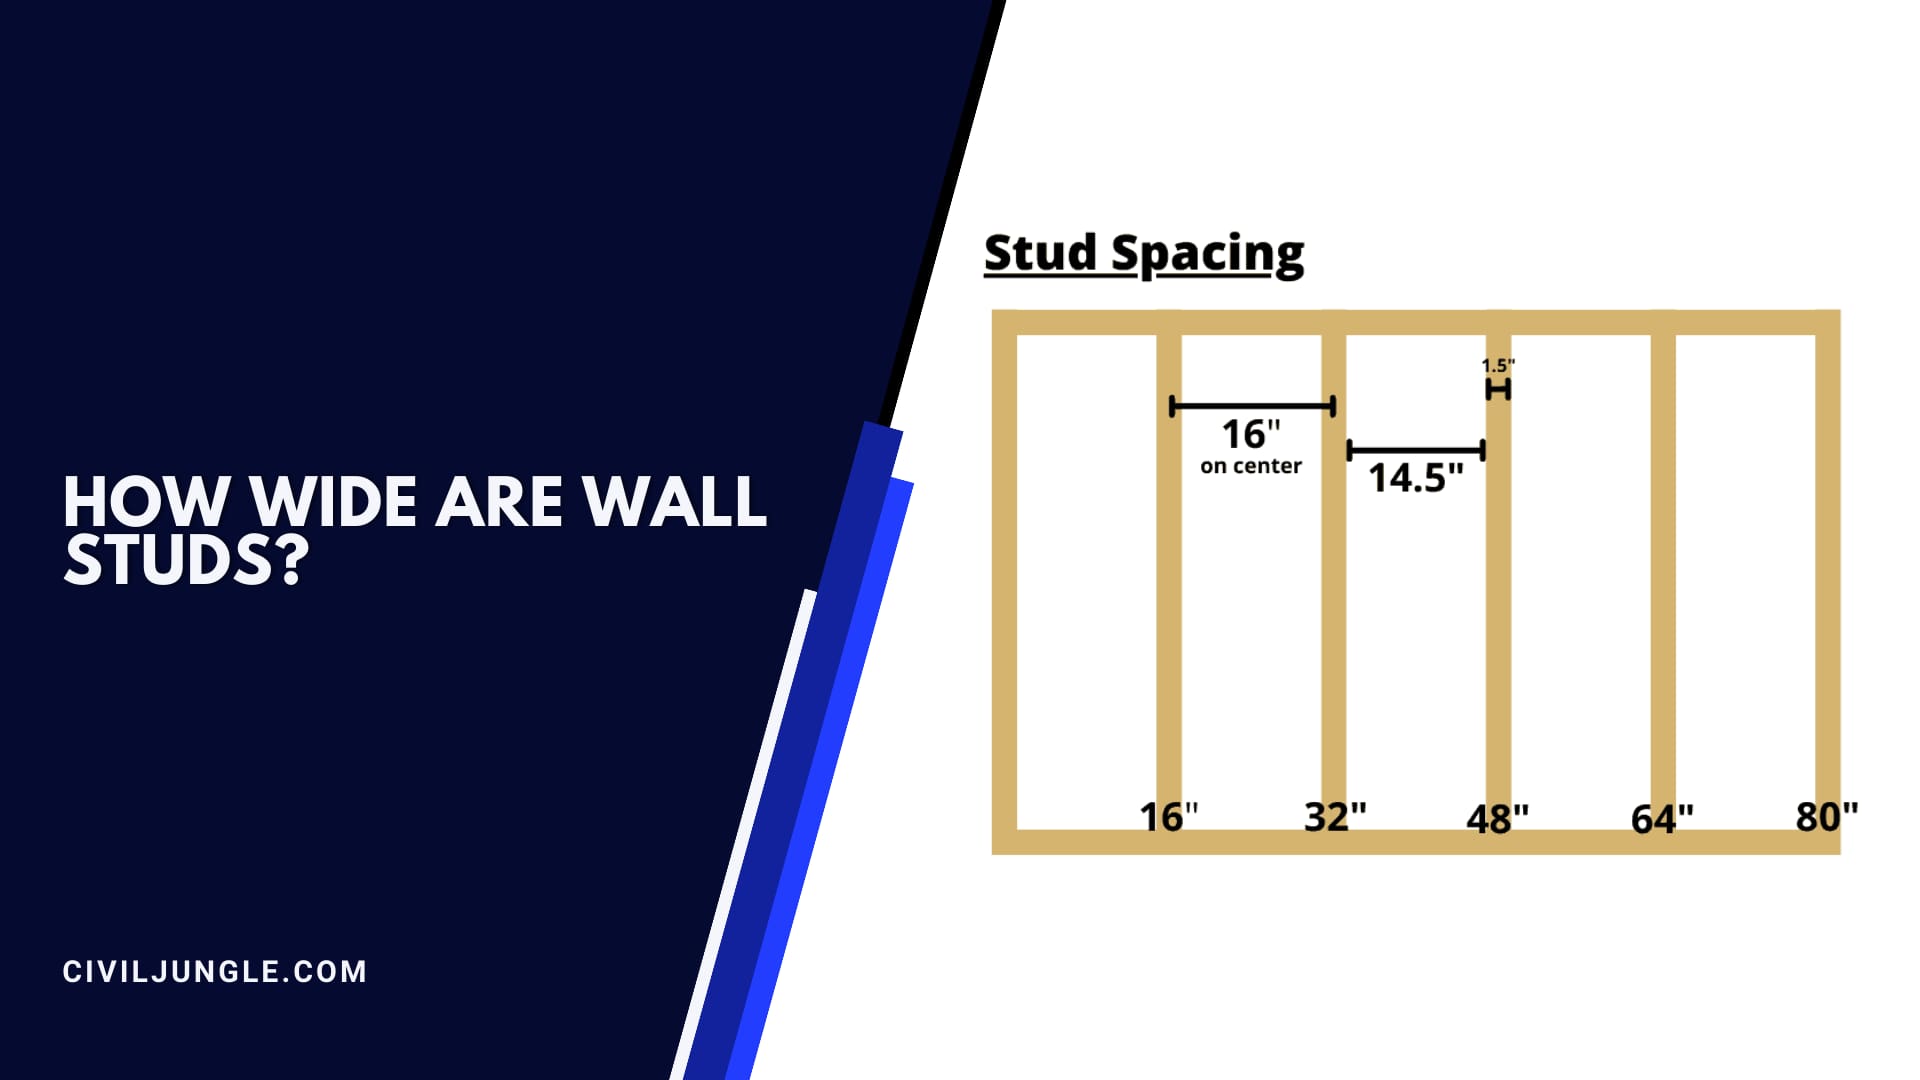 How Wide Are Wall Studs?